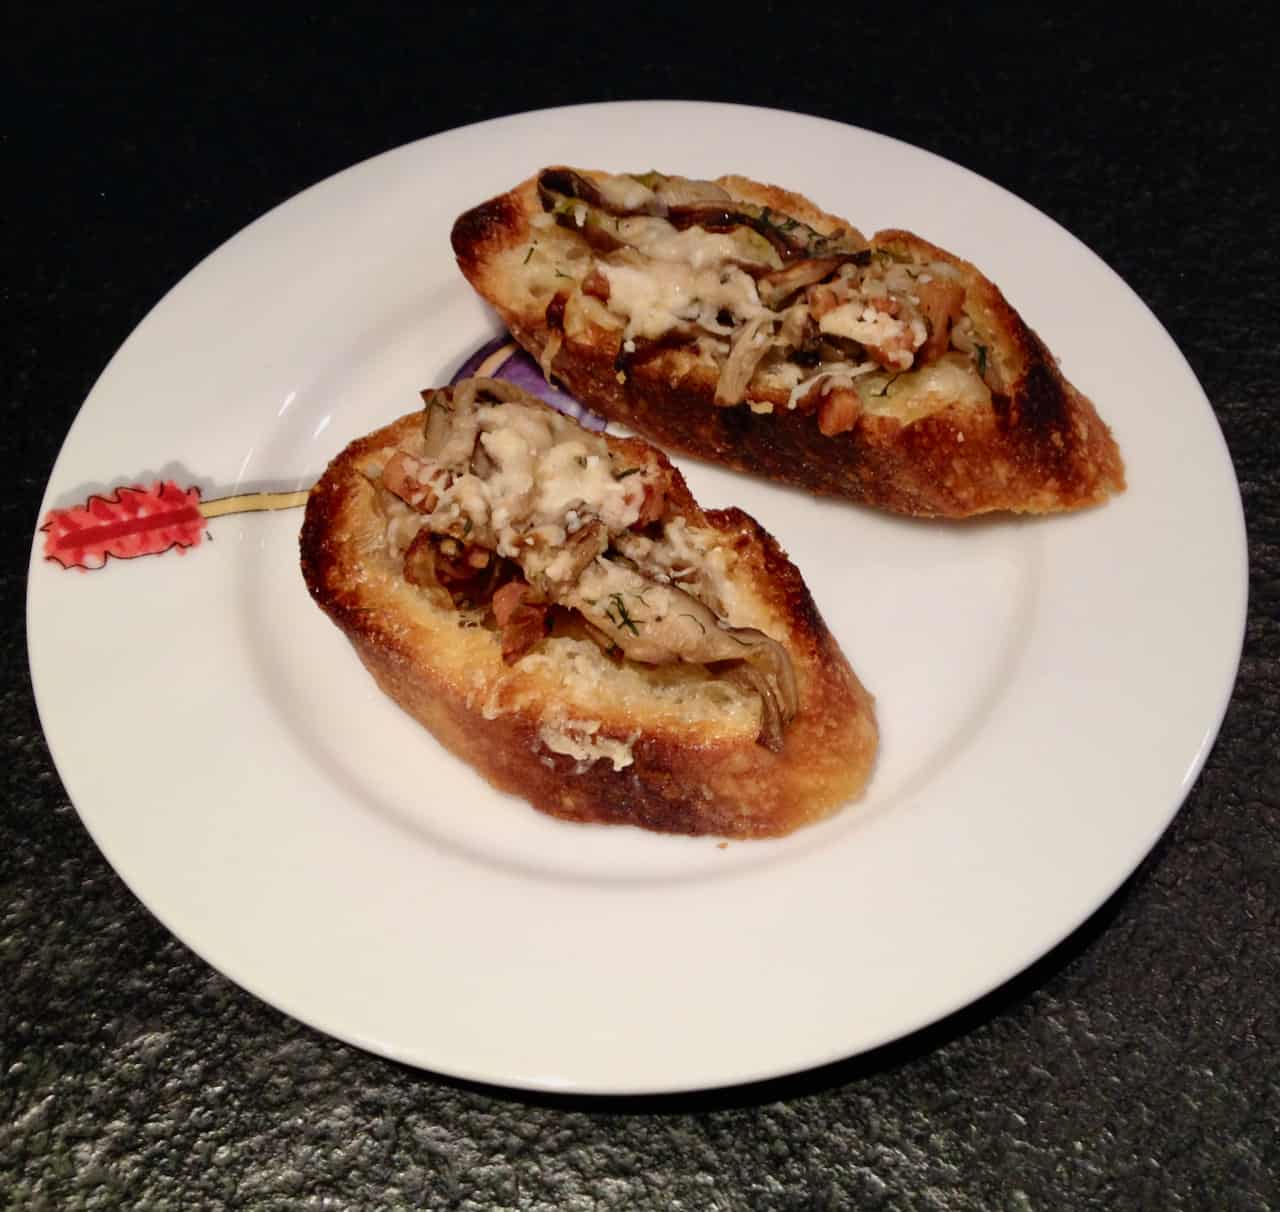 Cocktail Party Fare: Shiitake Mushroom Crostini topped with Parmesan Cheese